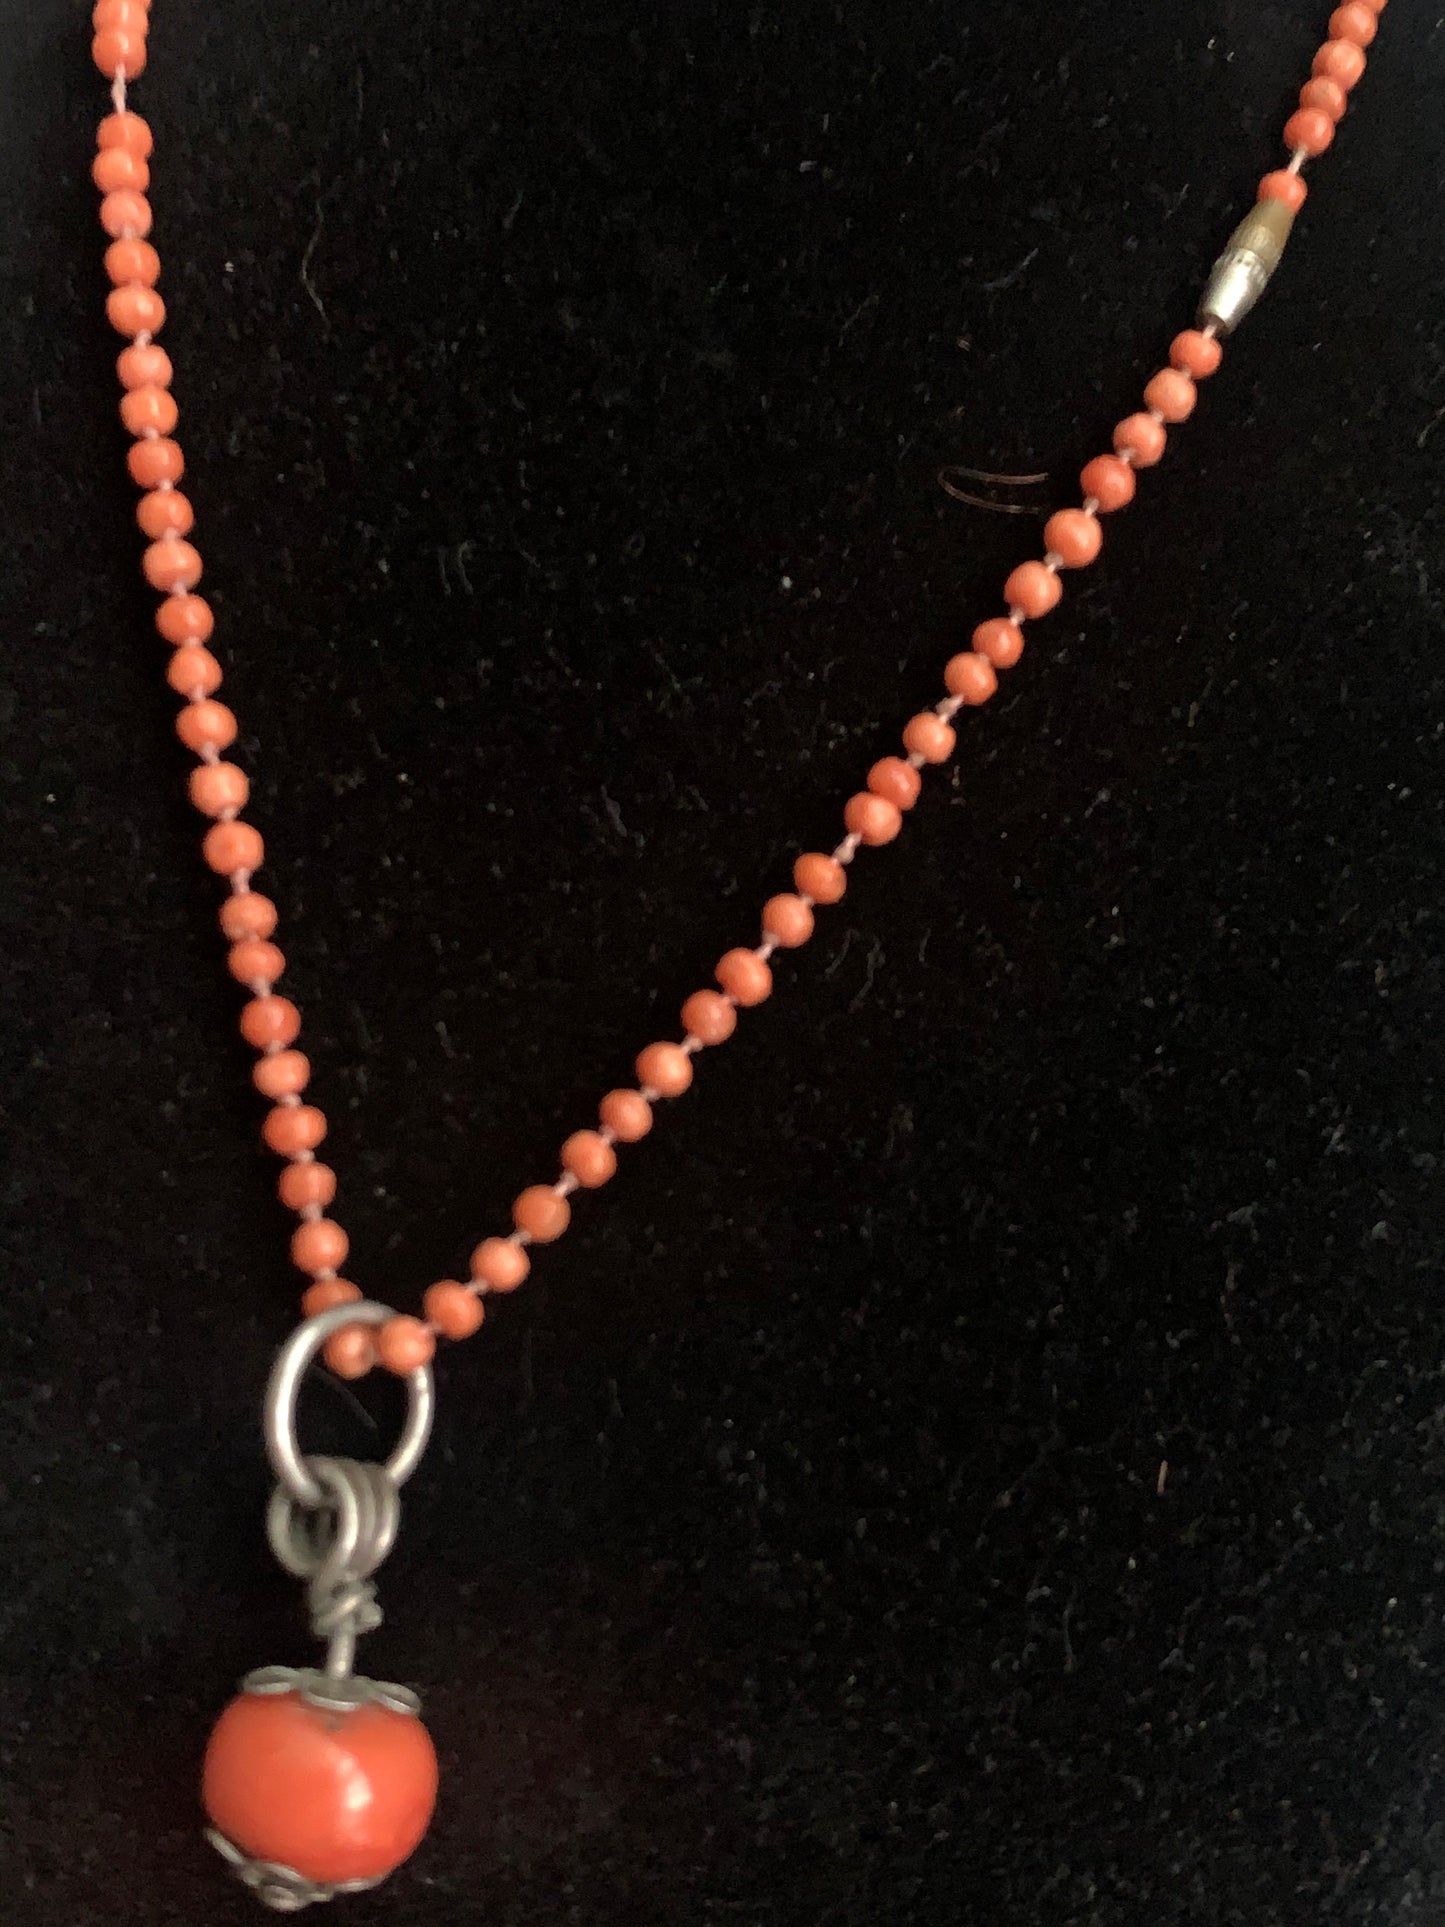 Coral necklace with pendant